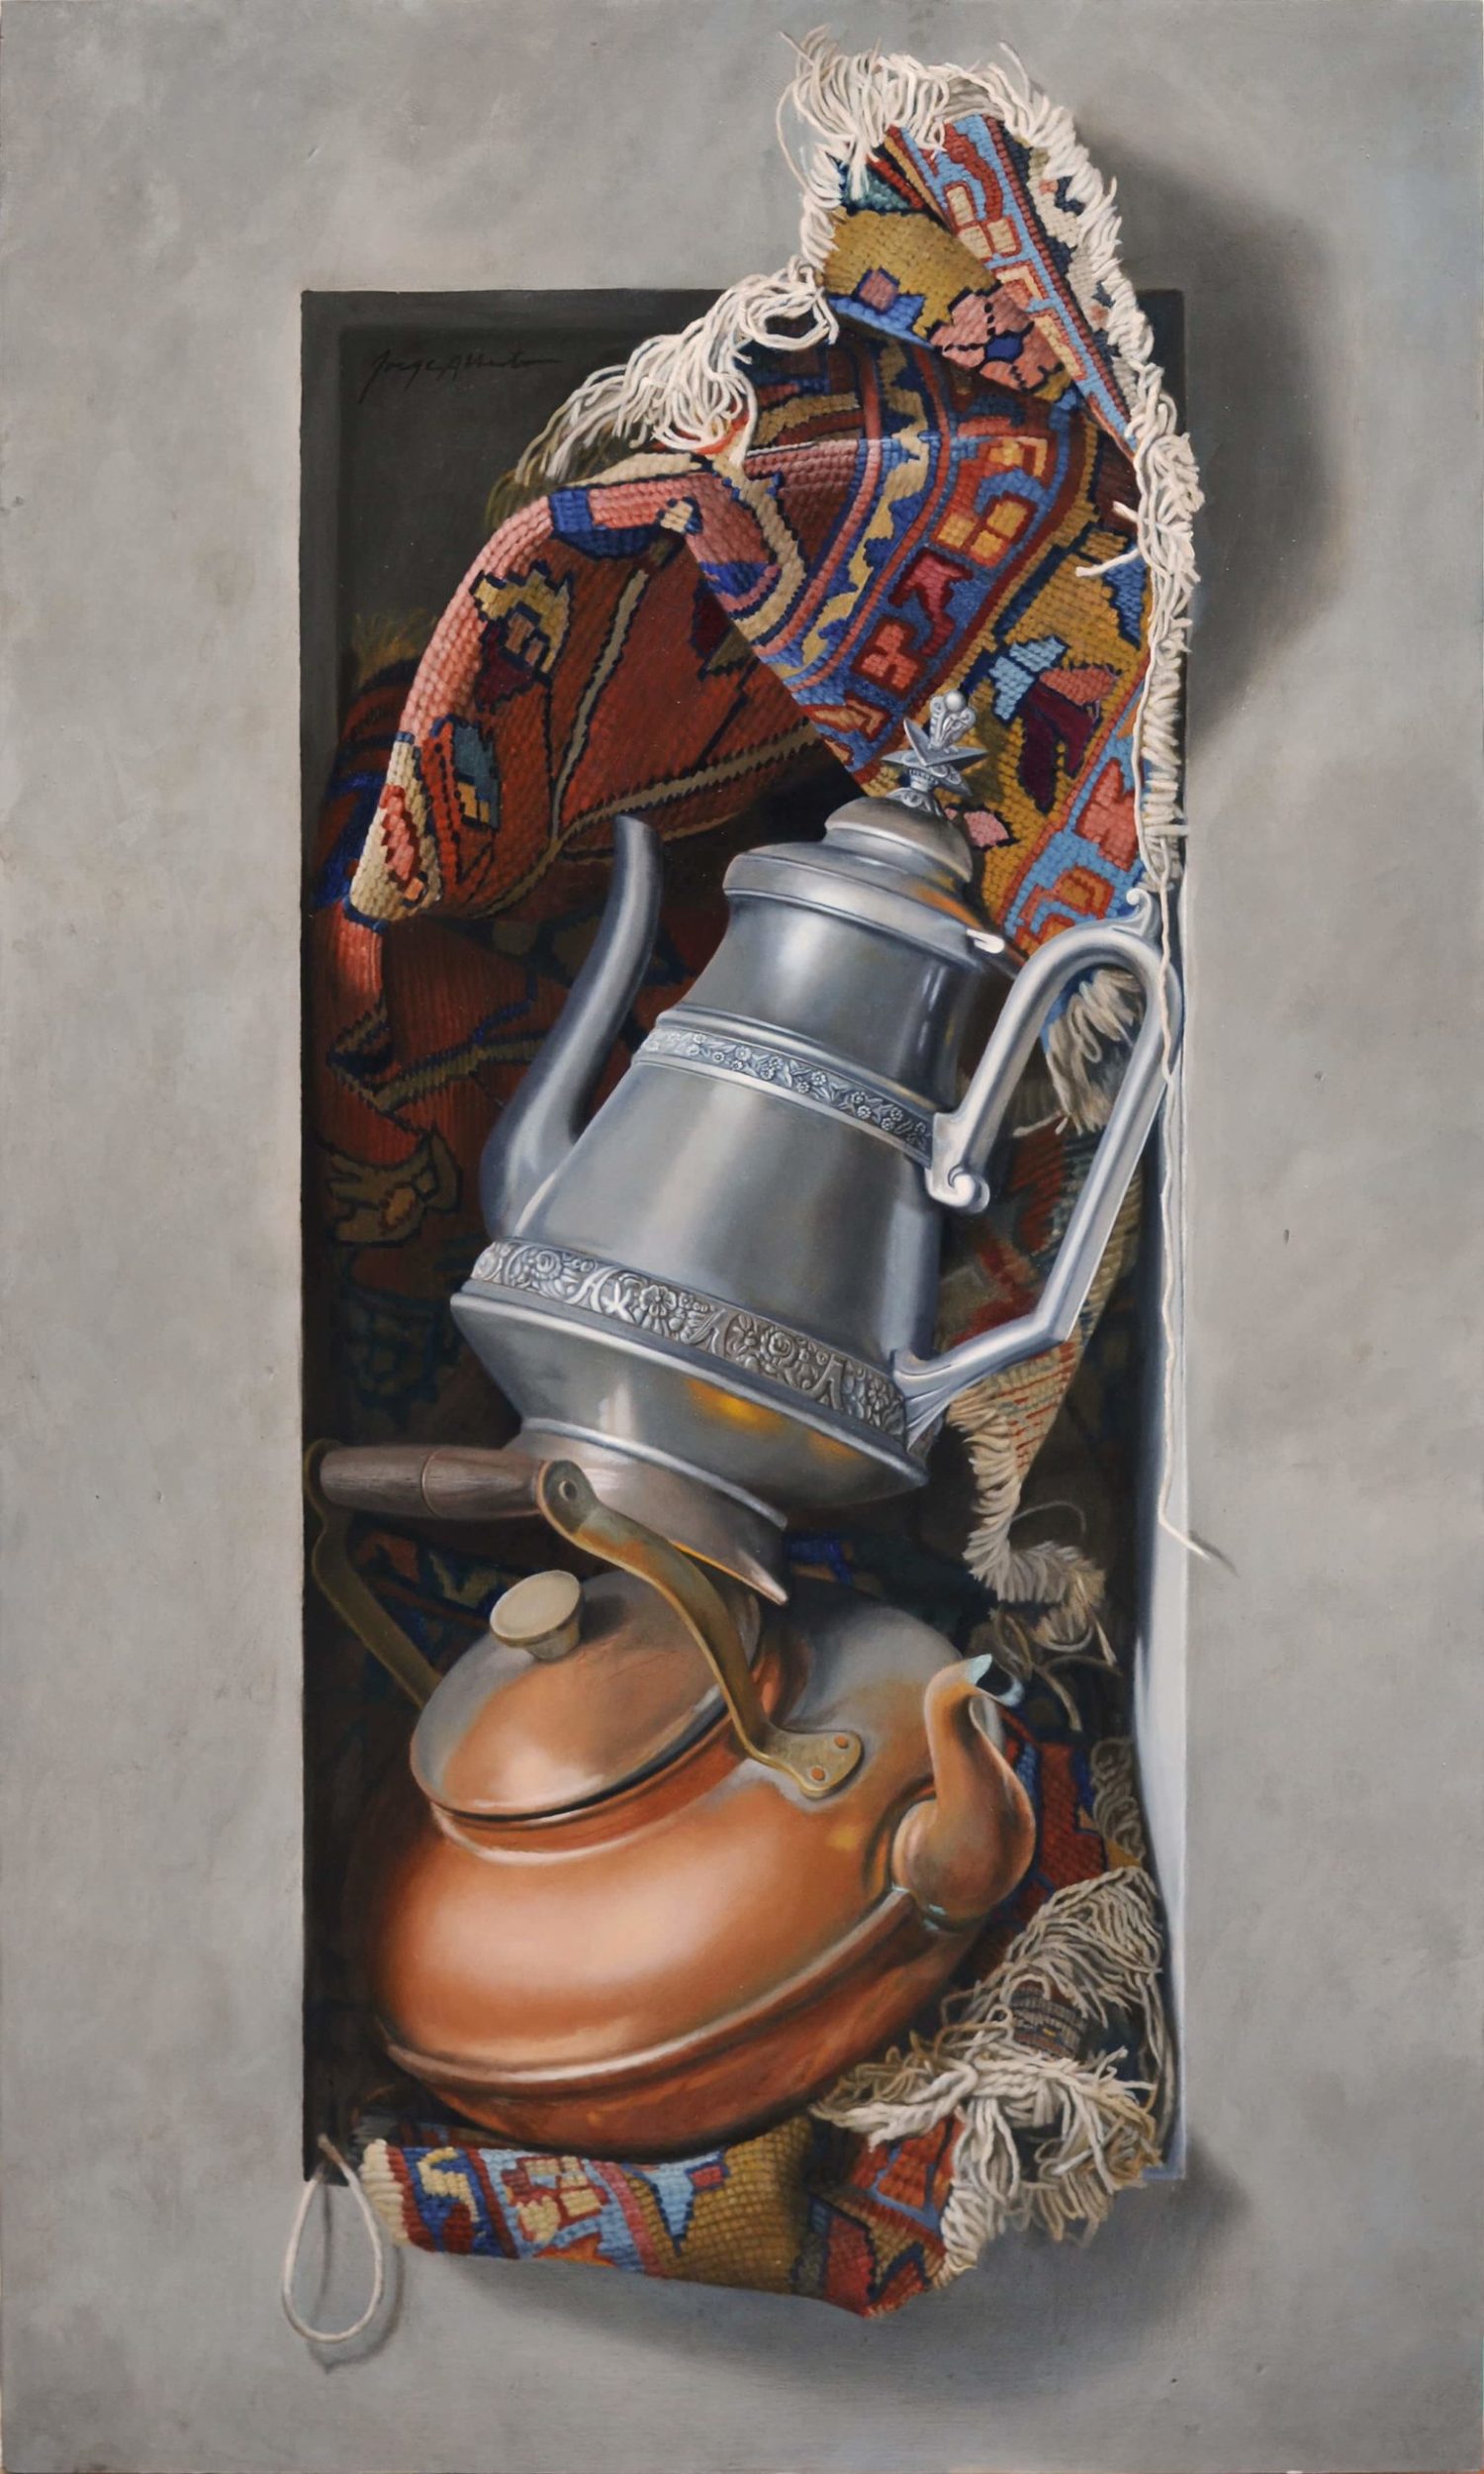 Still life arrangement of two old tea kettles and a piece of an old oriental rug. This objects are protruding out of a gray stone rectangular niche.